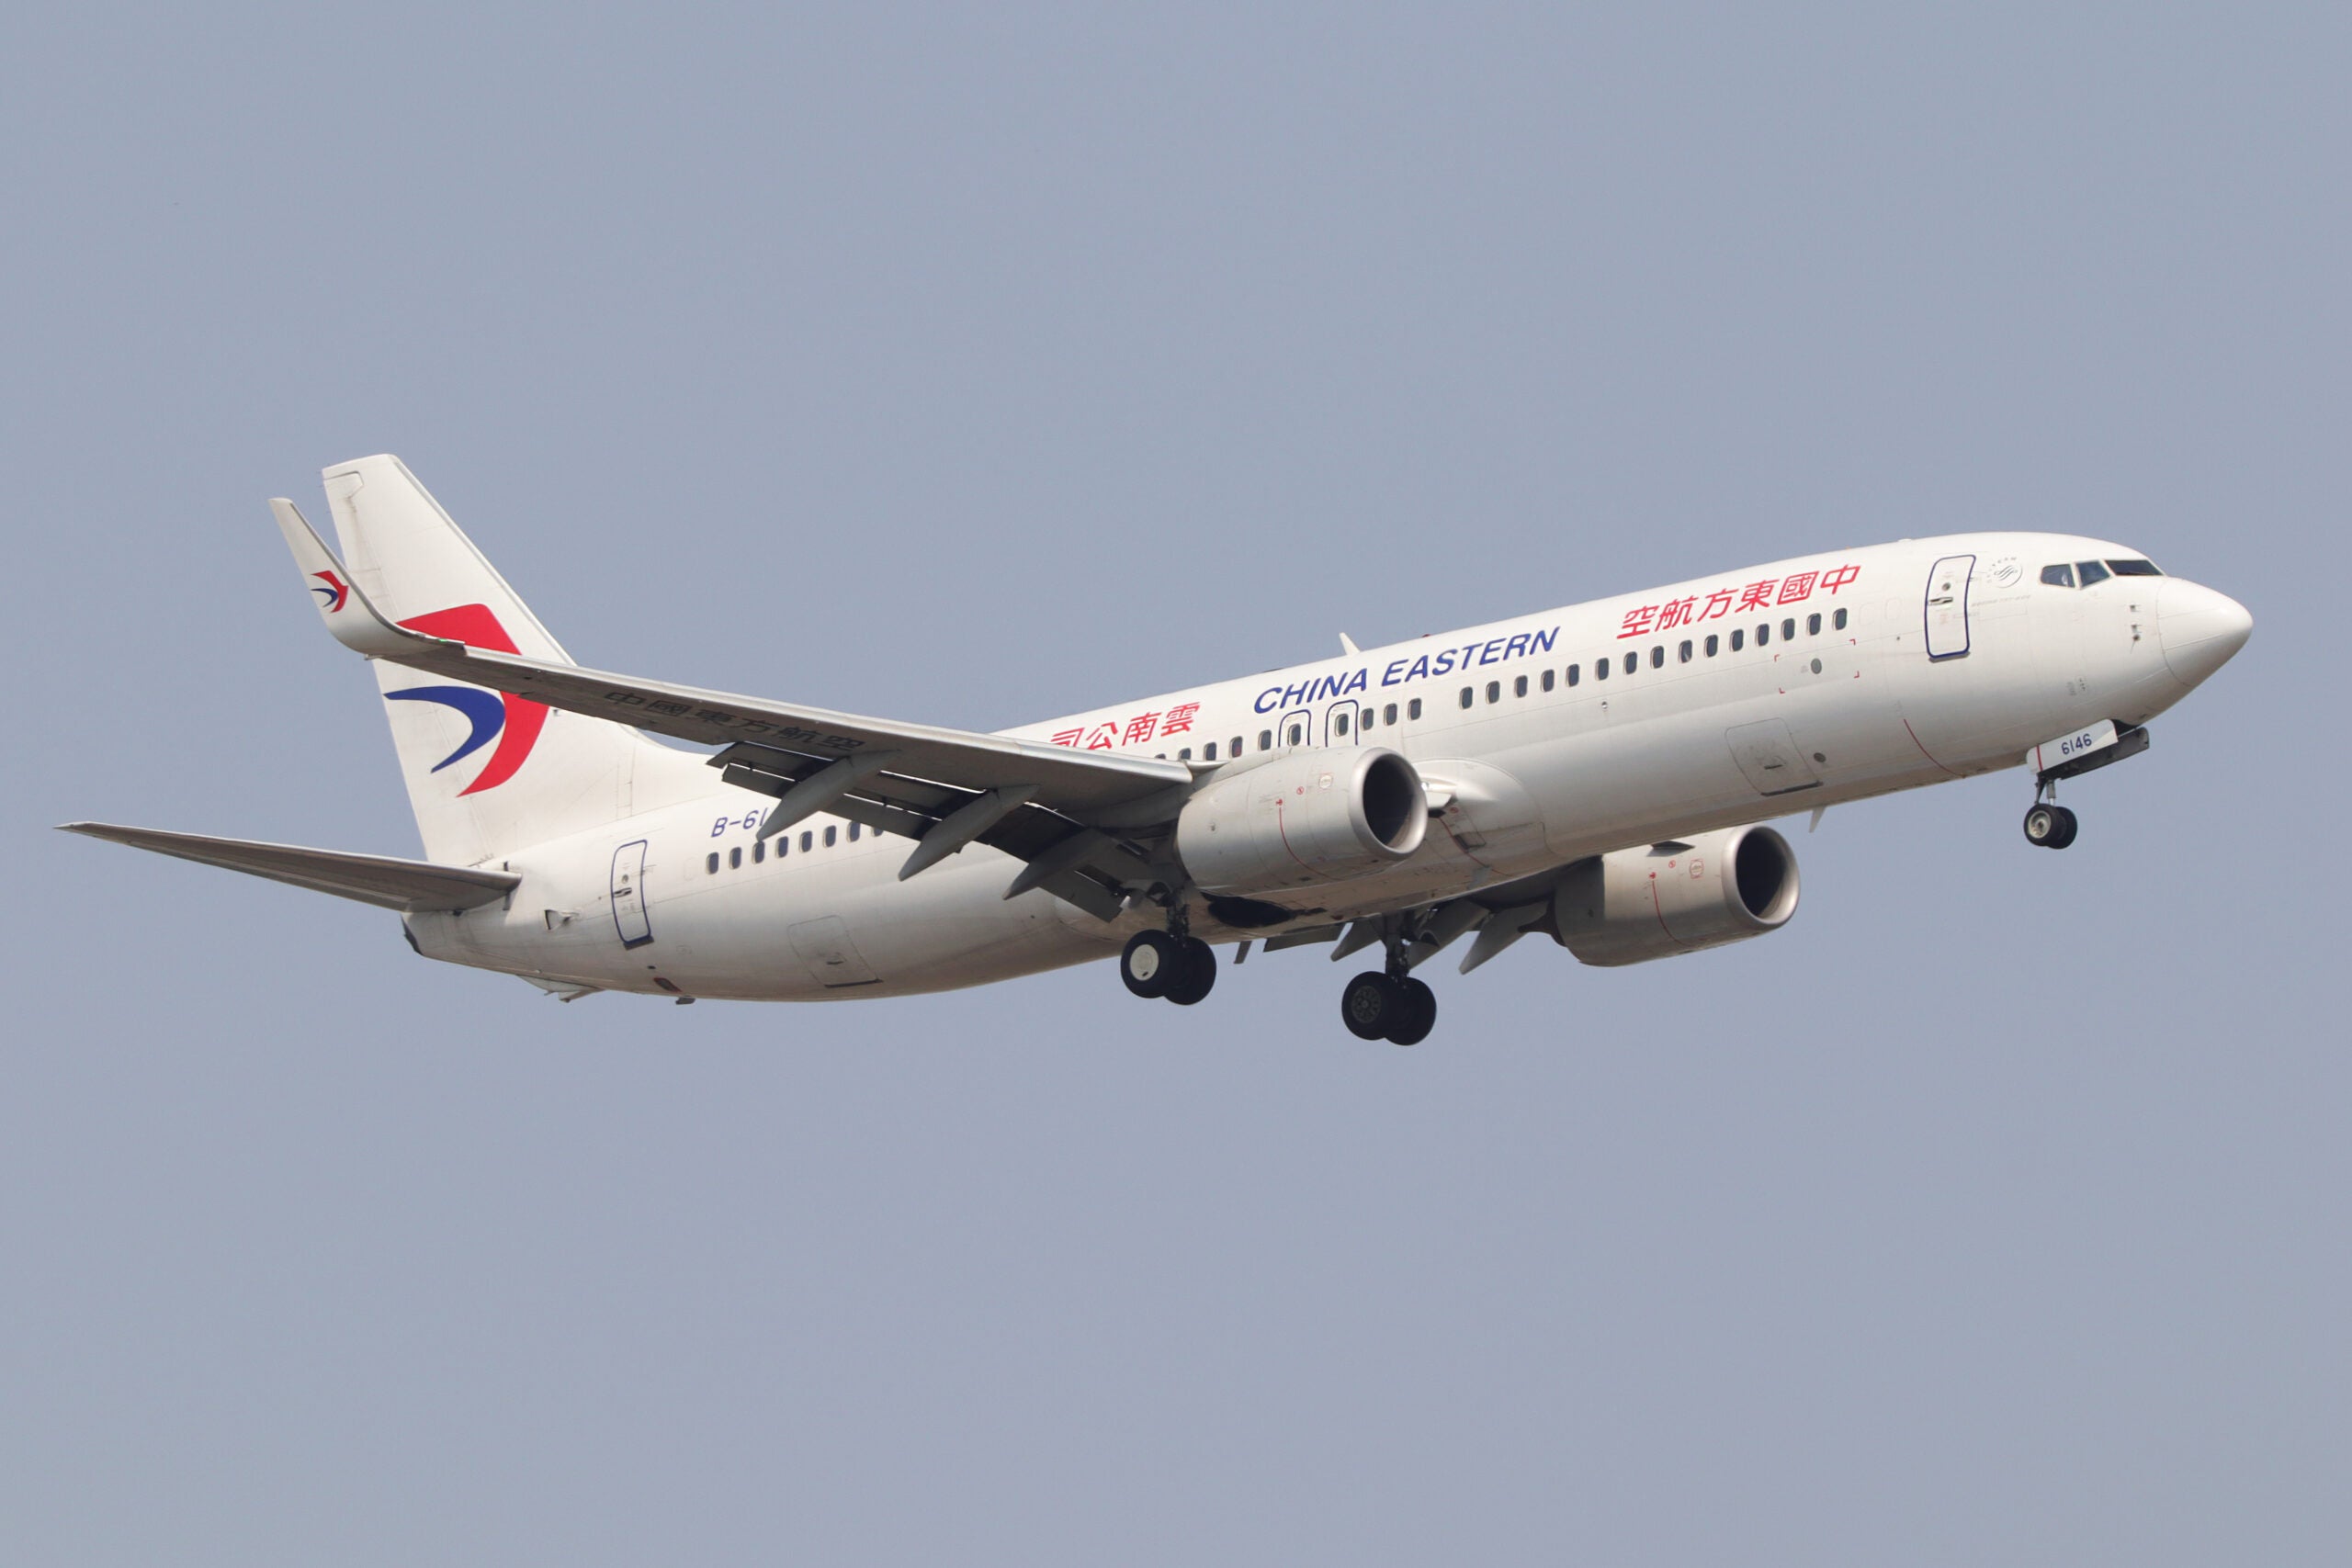 One Month After China Eastern Airlines Tragedy, Many Questions Remain